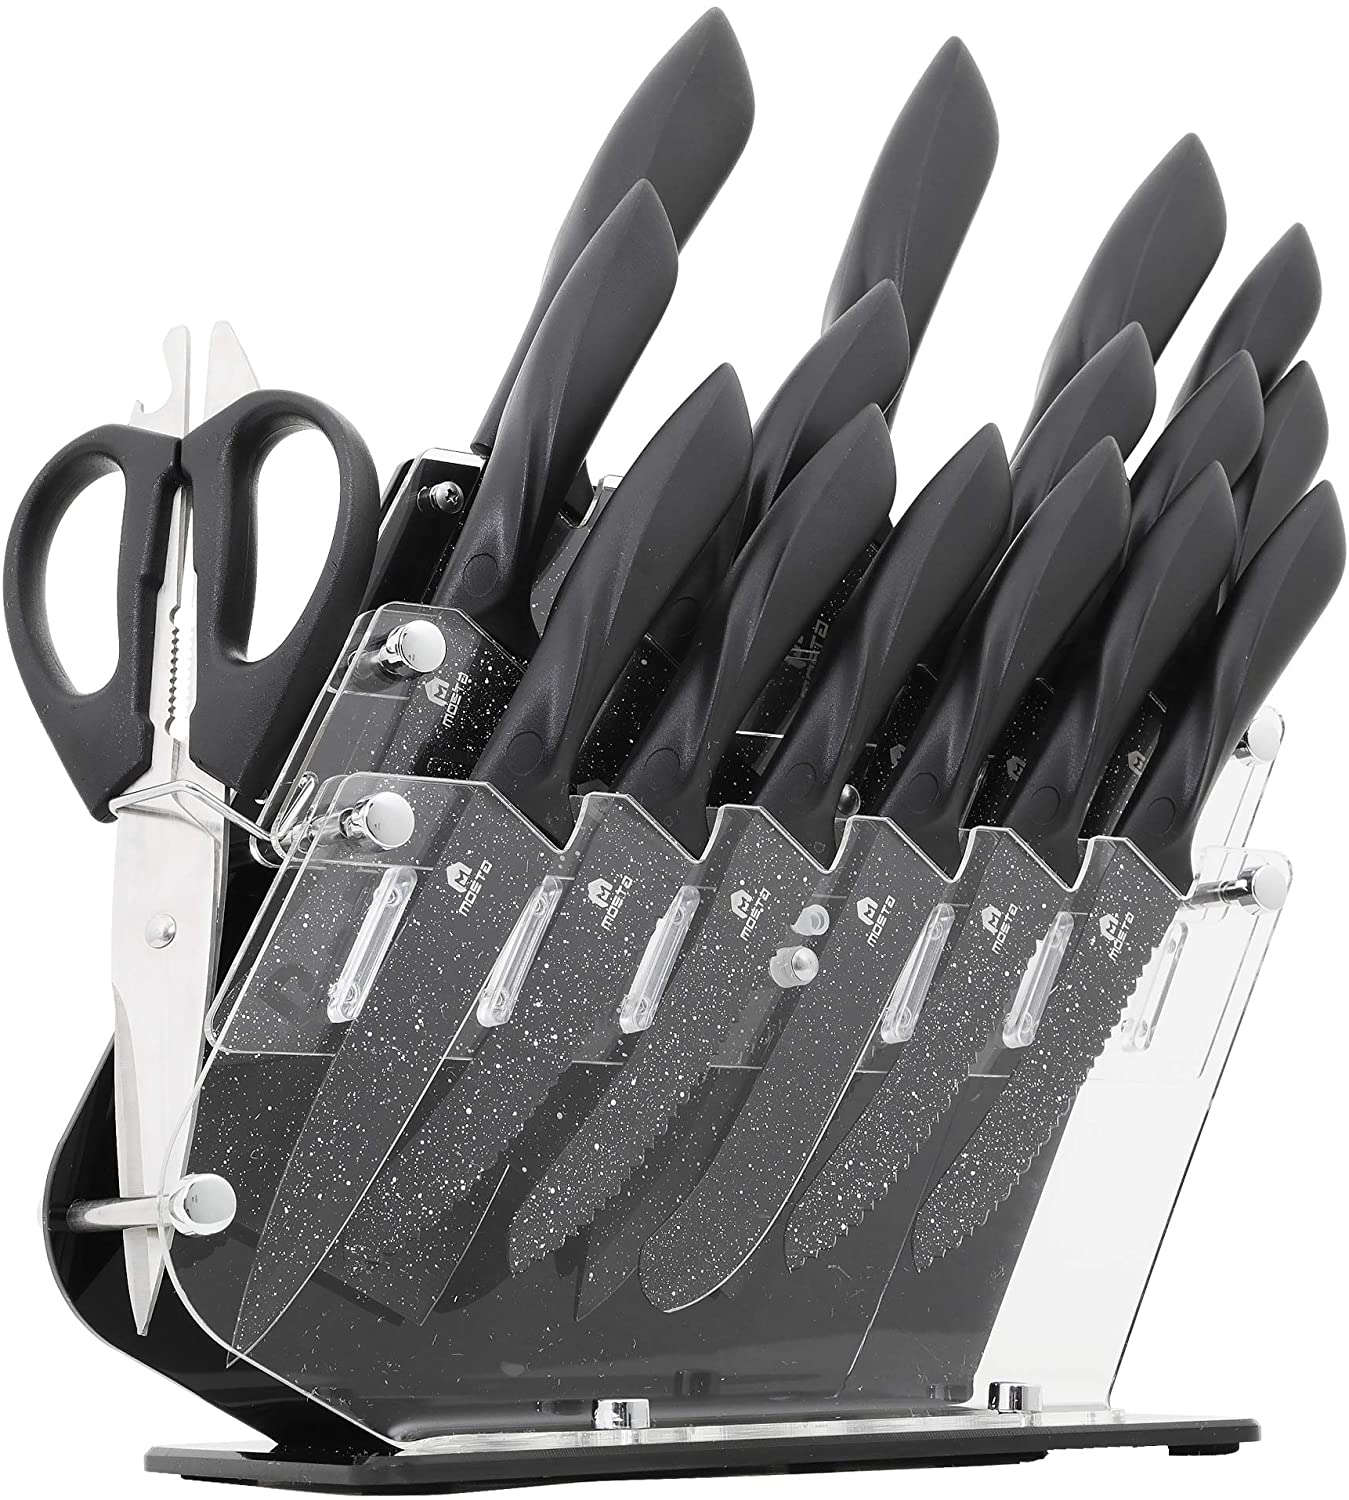 MOSTA Ceramic Coated Knife Block Set with 16Pcs Kitchen Knives, Chef Knife,Bread Knife,Steak Knife,Chopper Knife,Butter Knives,Cheese